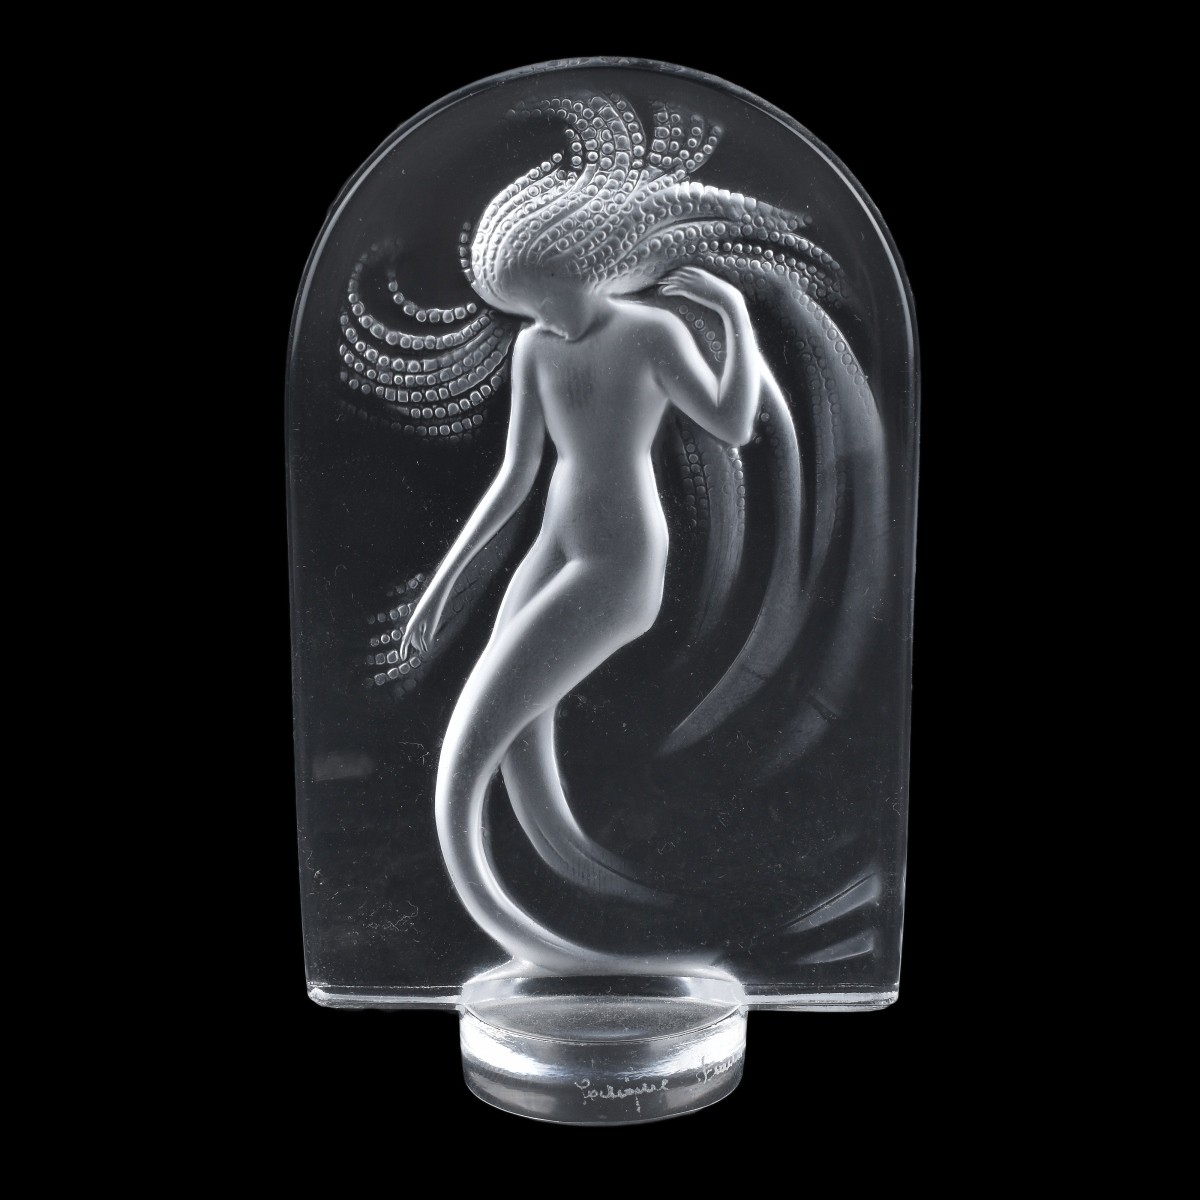 Grouping of Three (3) Lalique Crystal Figurines